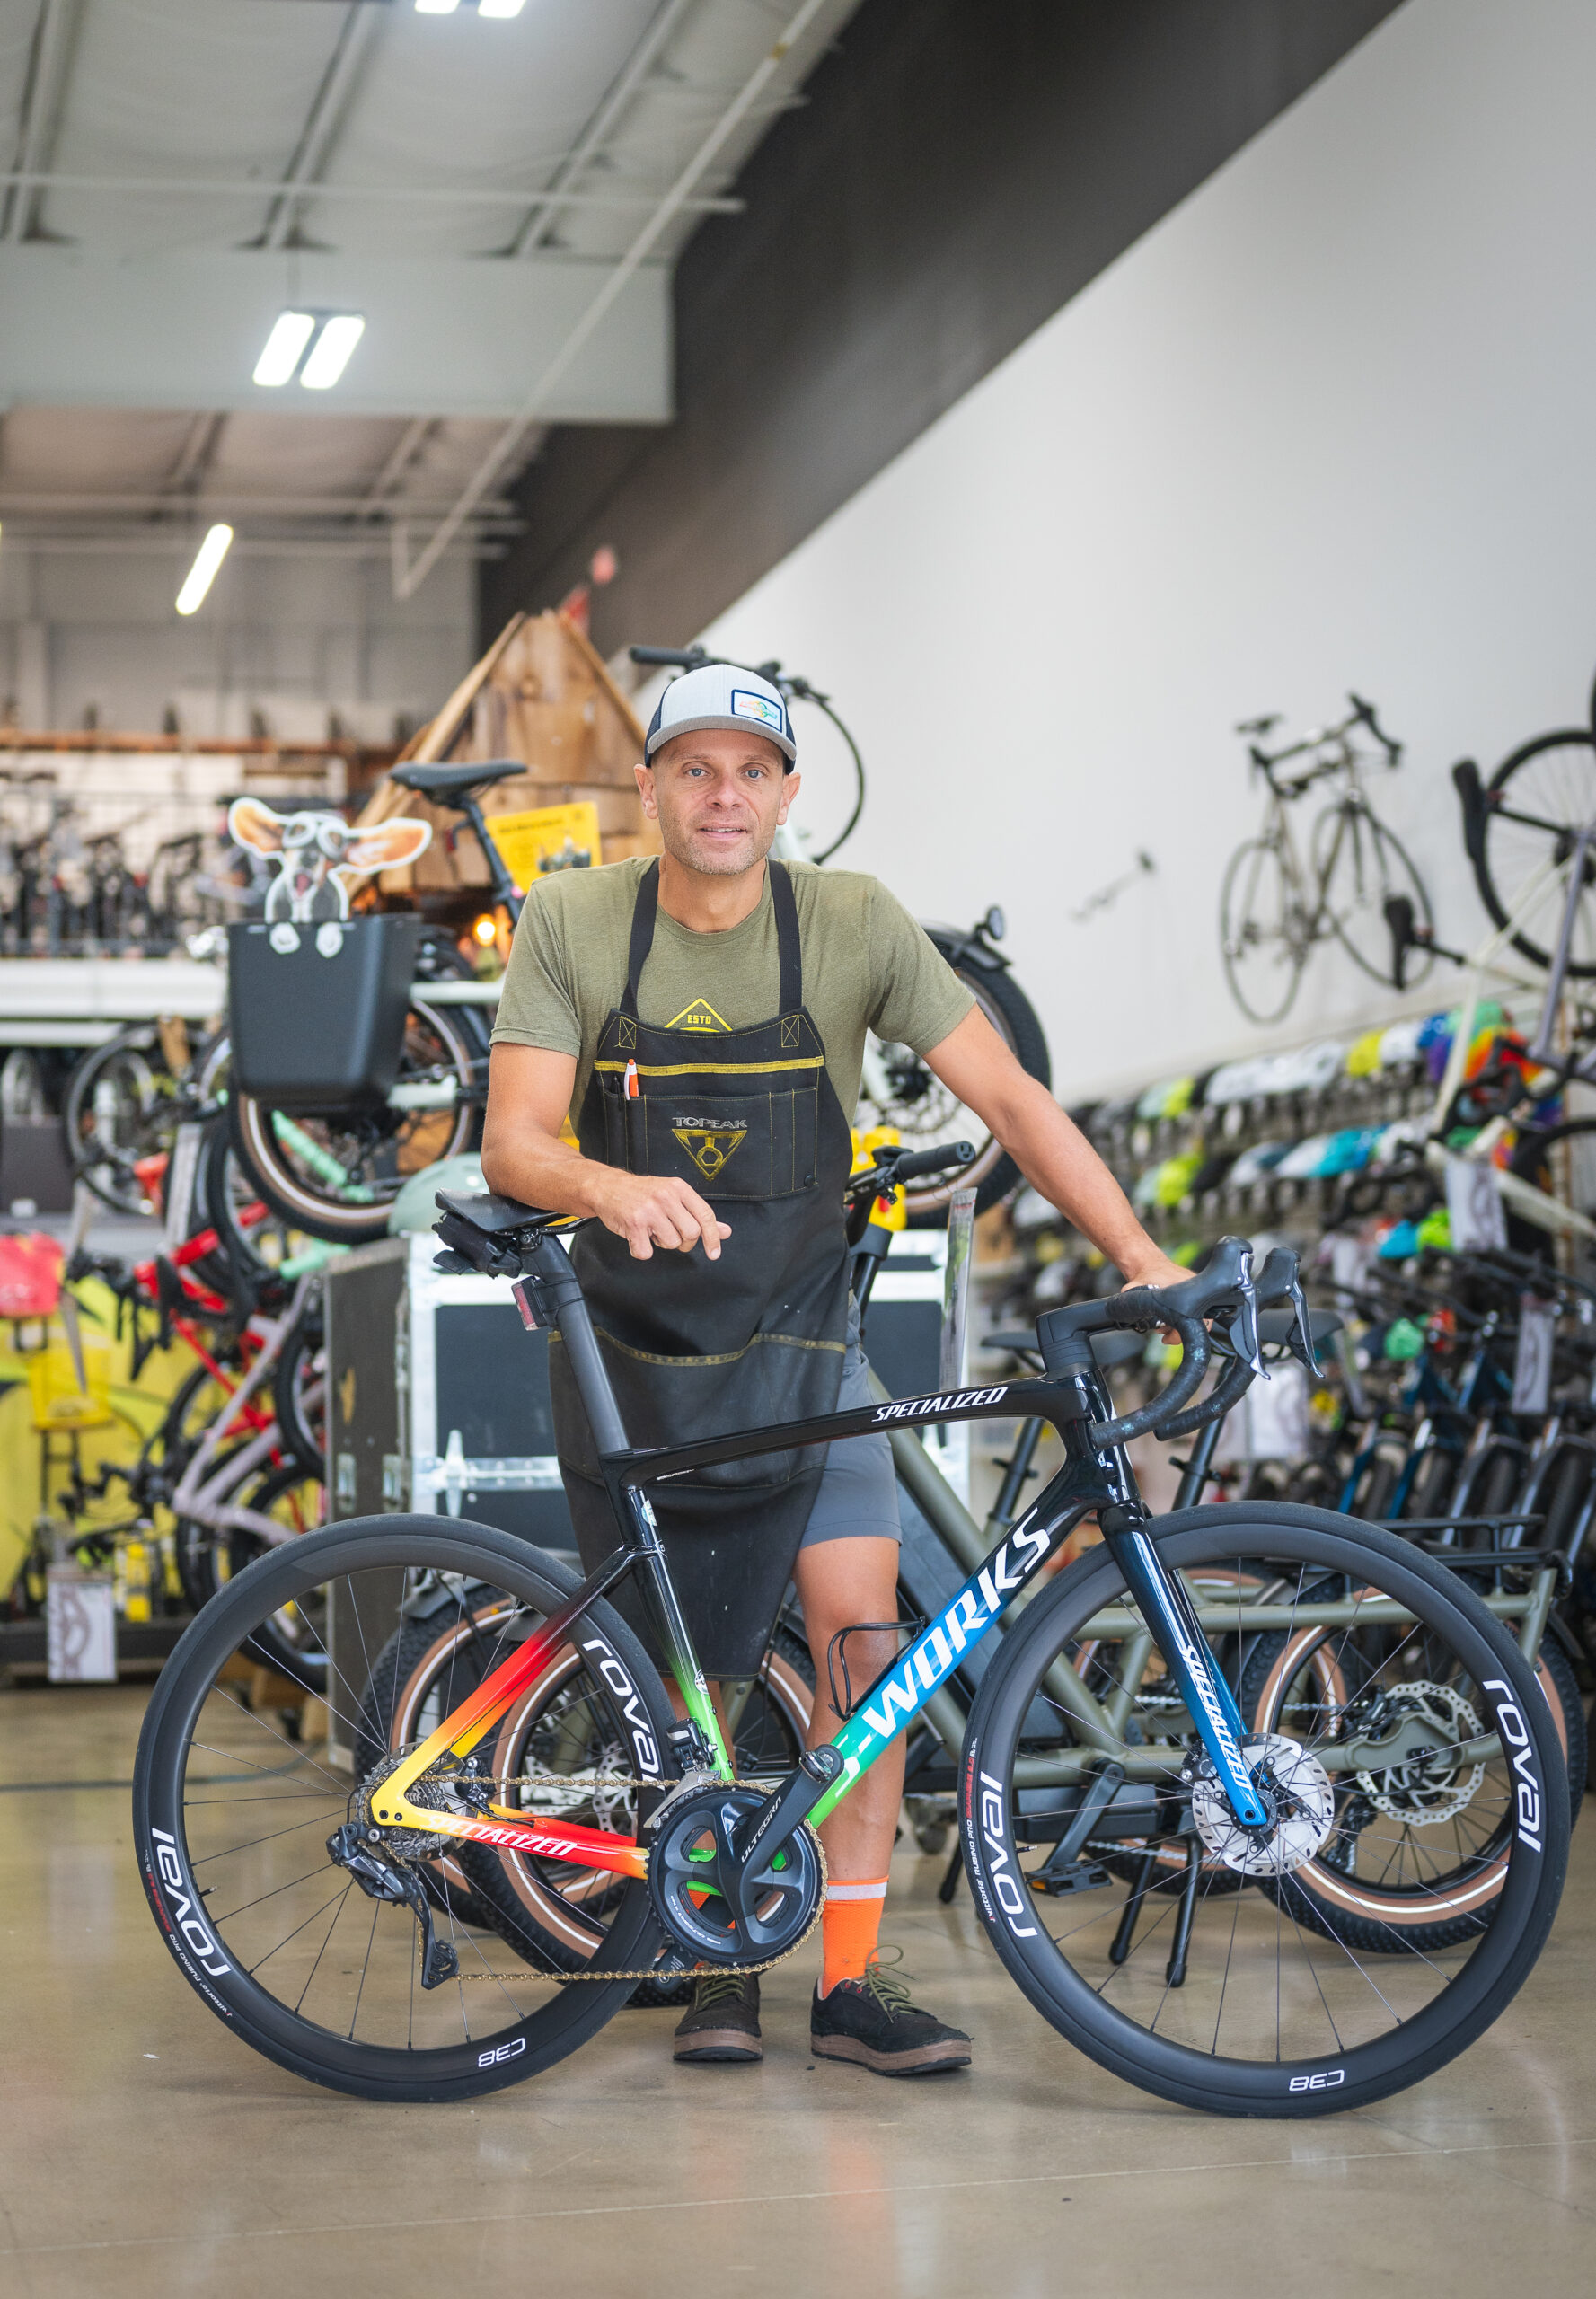 Mark Branle started Lititz Bikeworks in 2012 with the sole intention of being a community focused brick and mortar dealer. He brings a lifetime of cycling knowledge and skill to Lititz and surrounding towns in Lancaster, PA.